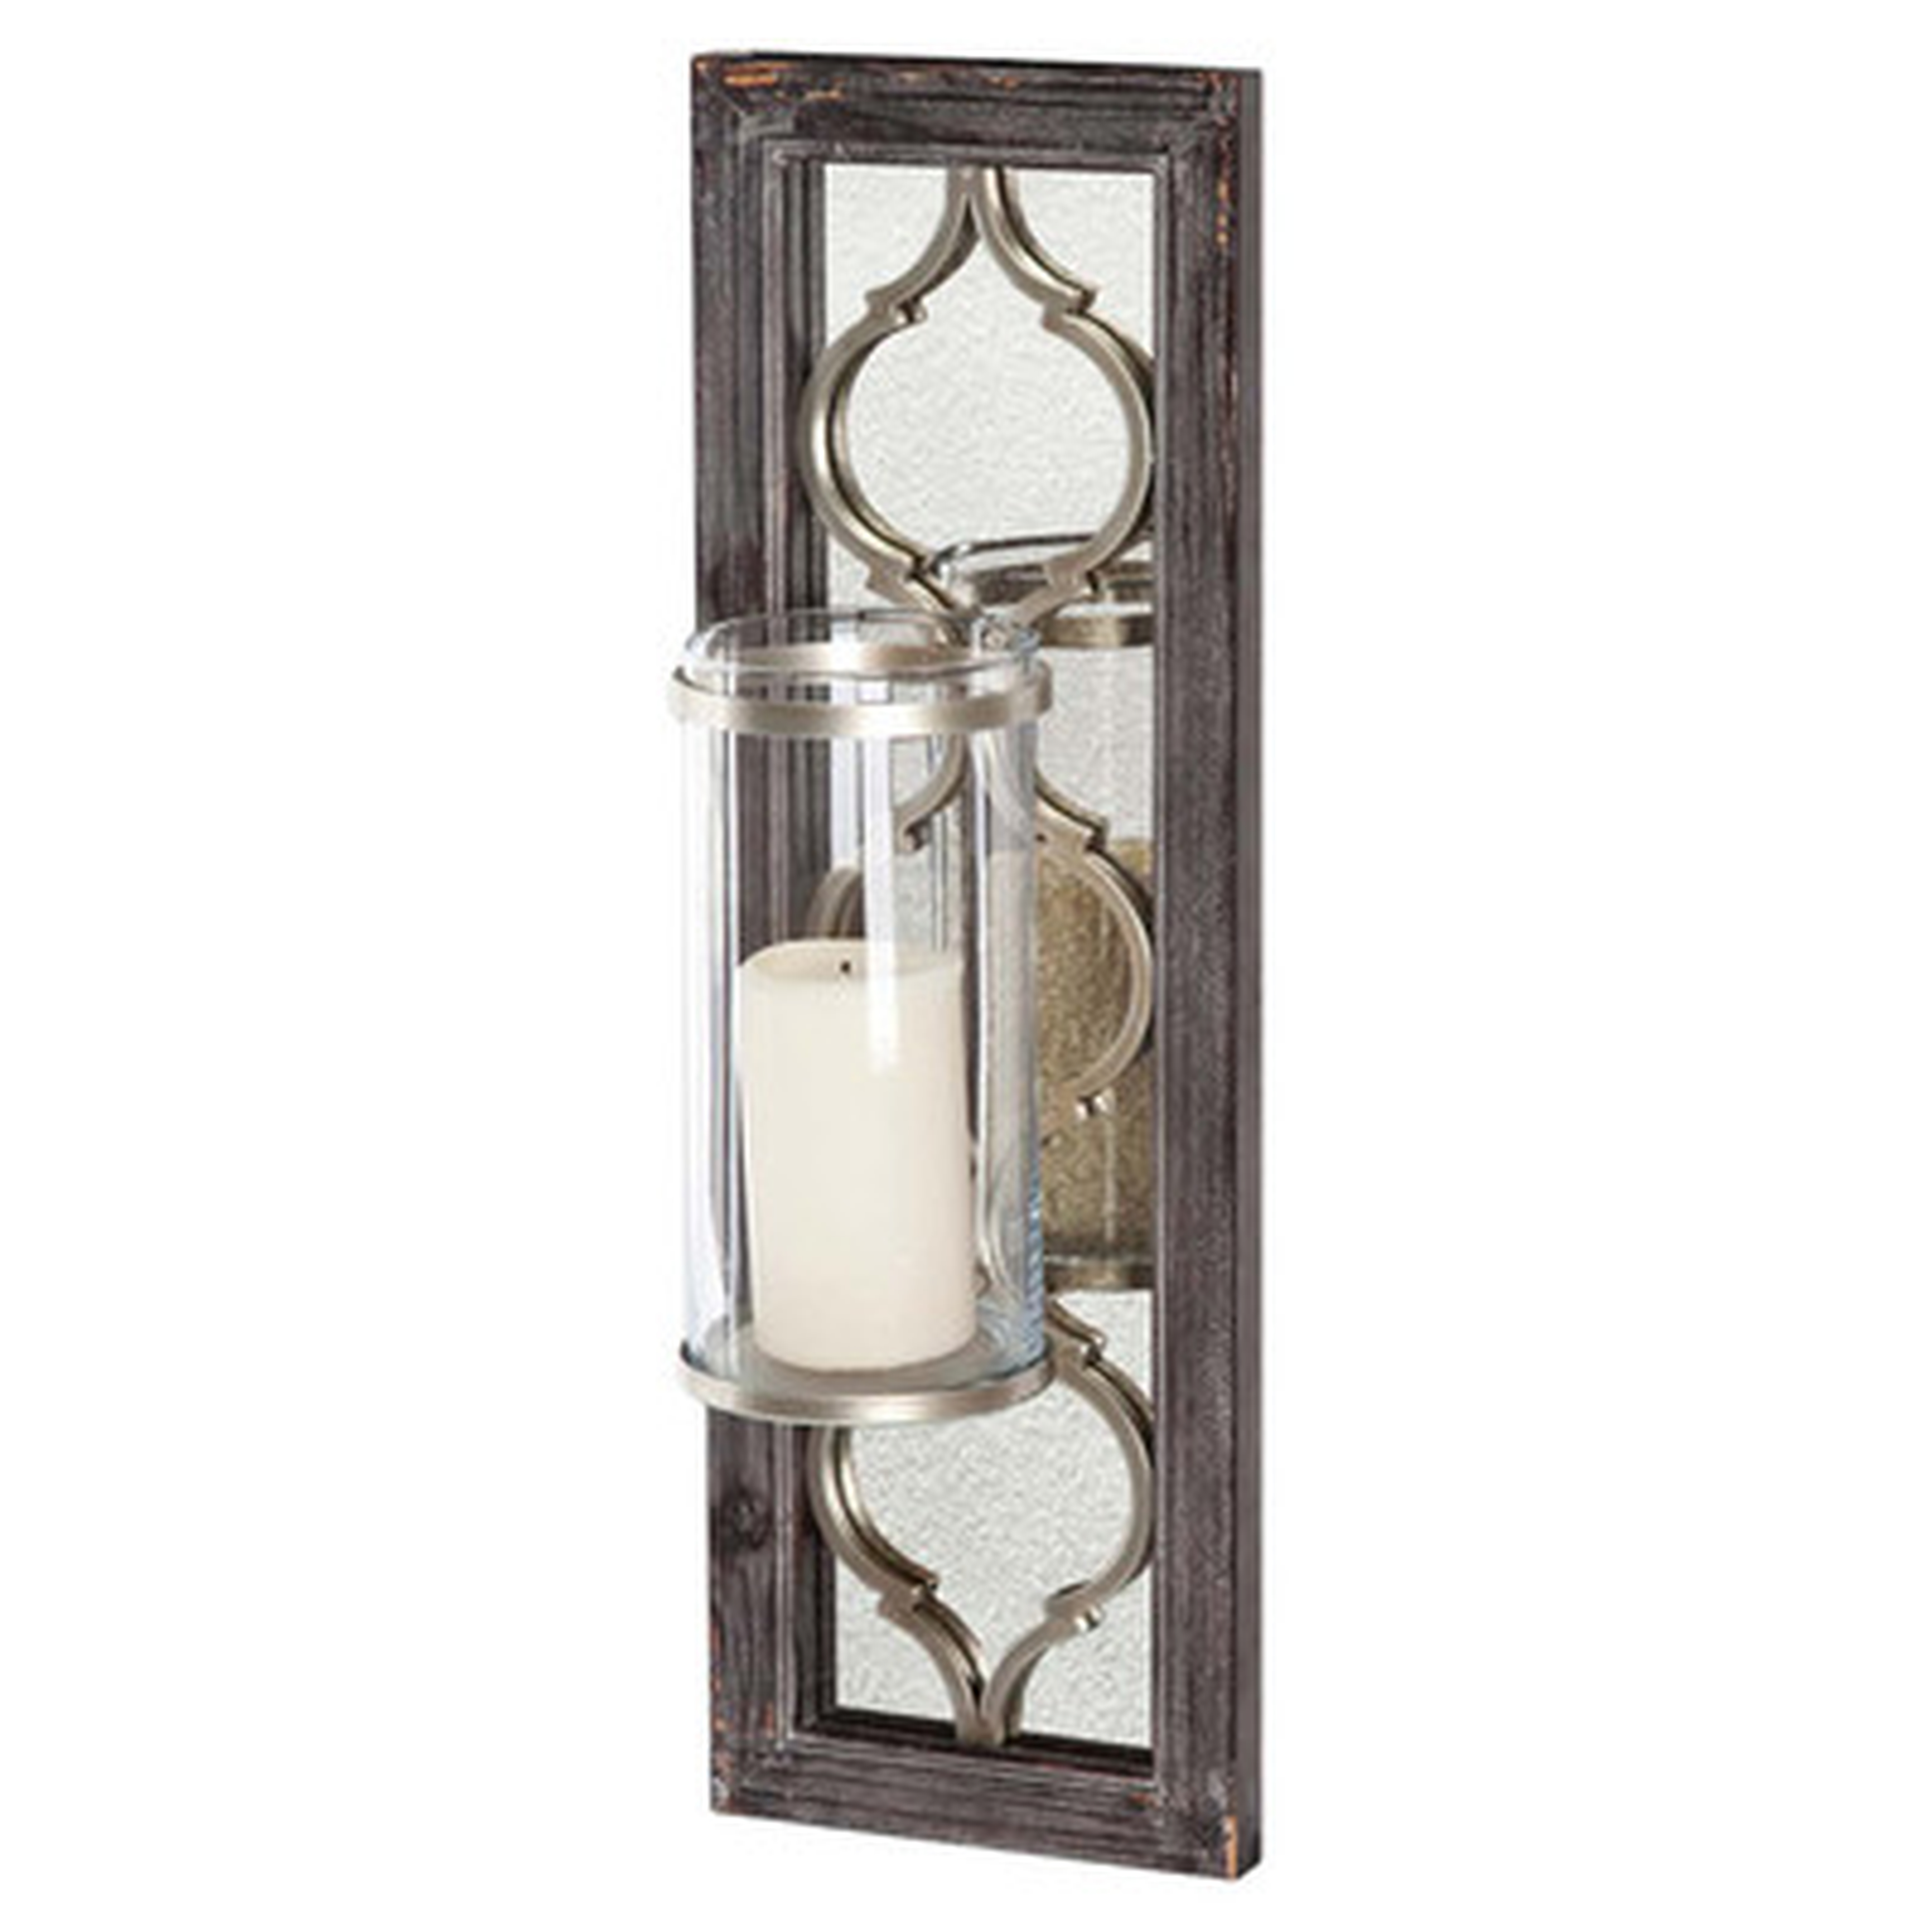 Mirrored Glass/Wood Candle Sconce - AllModern